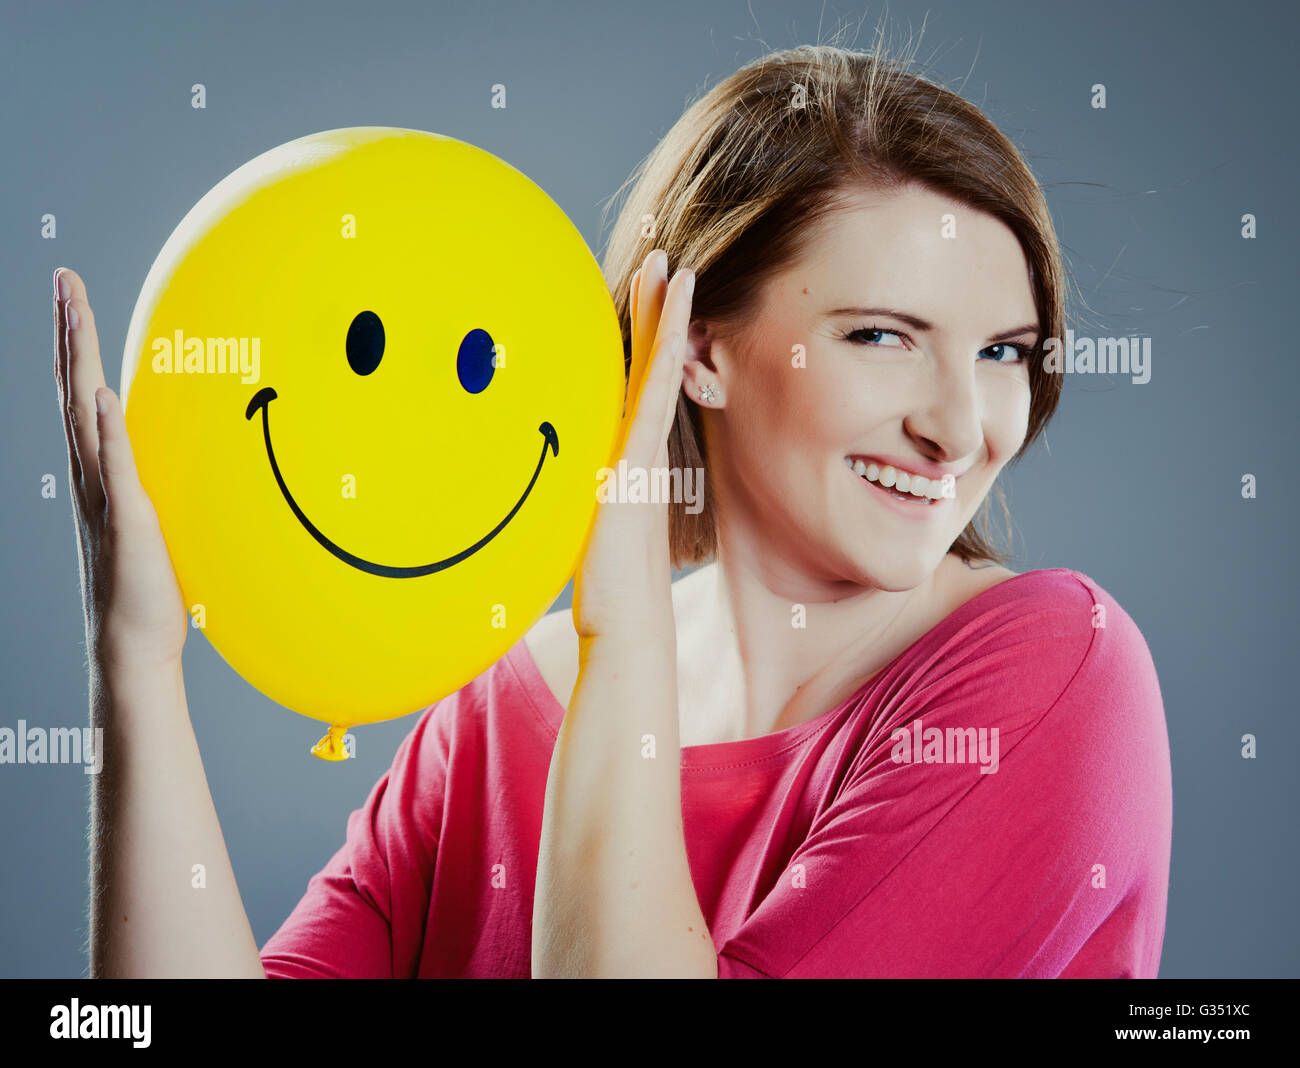 Smiling young woman holding a smiley face balloon Stock Photo